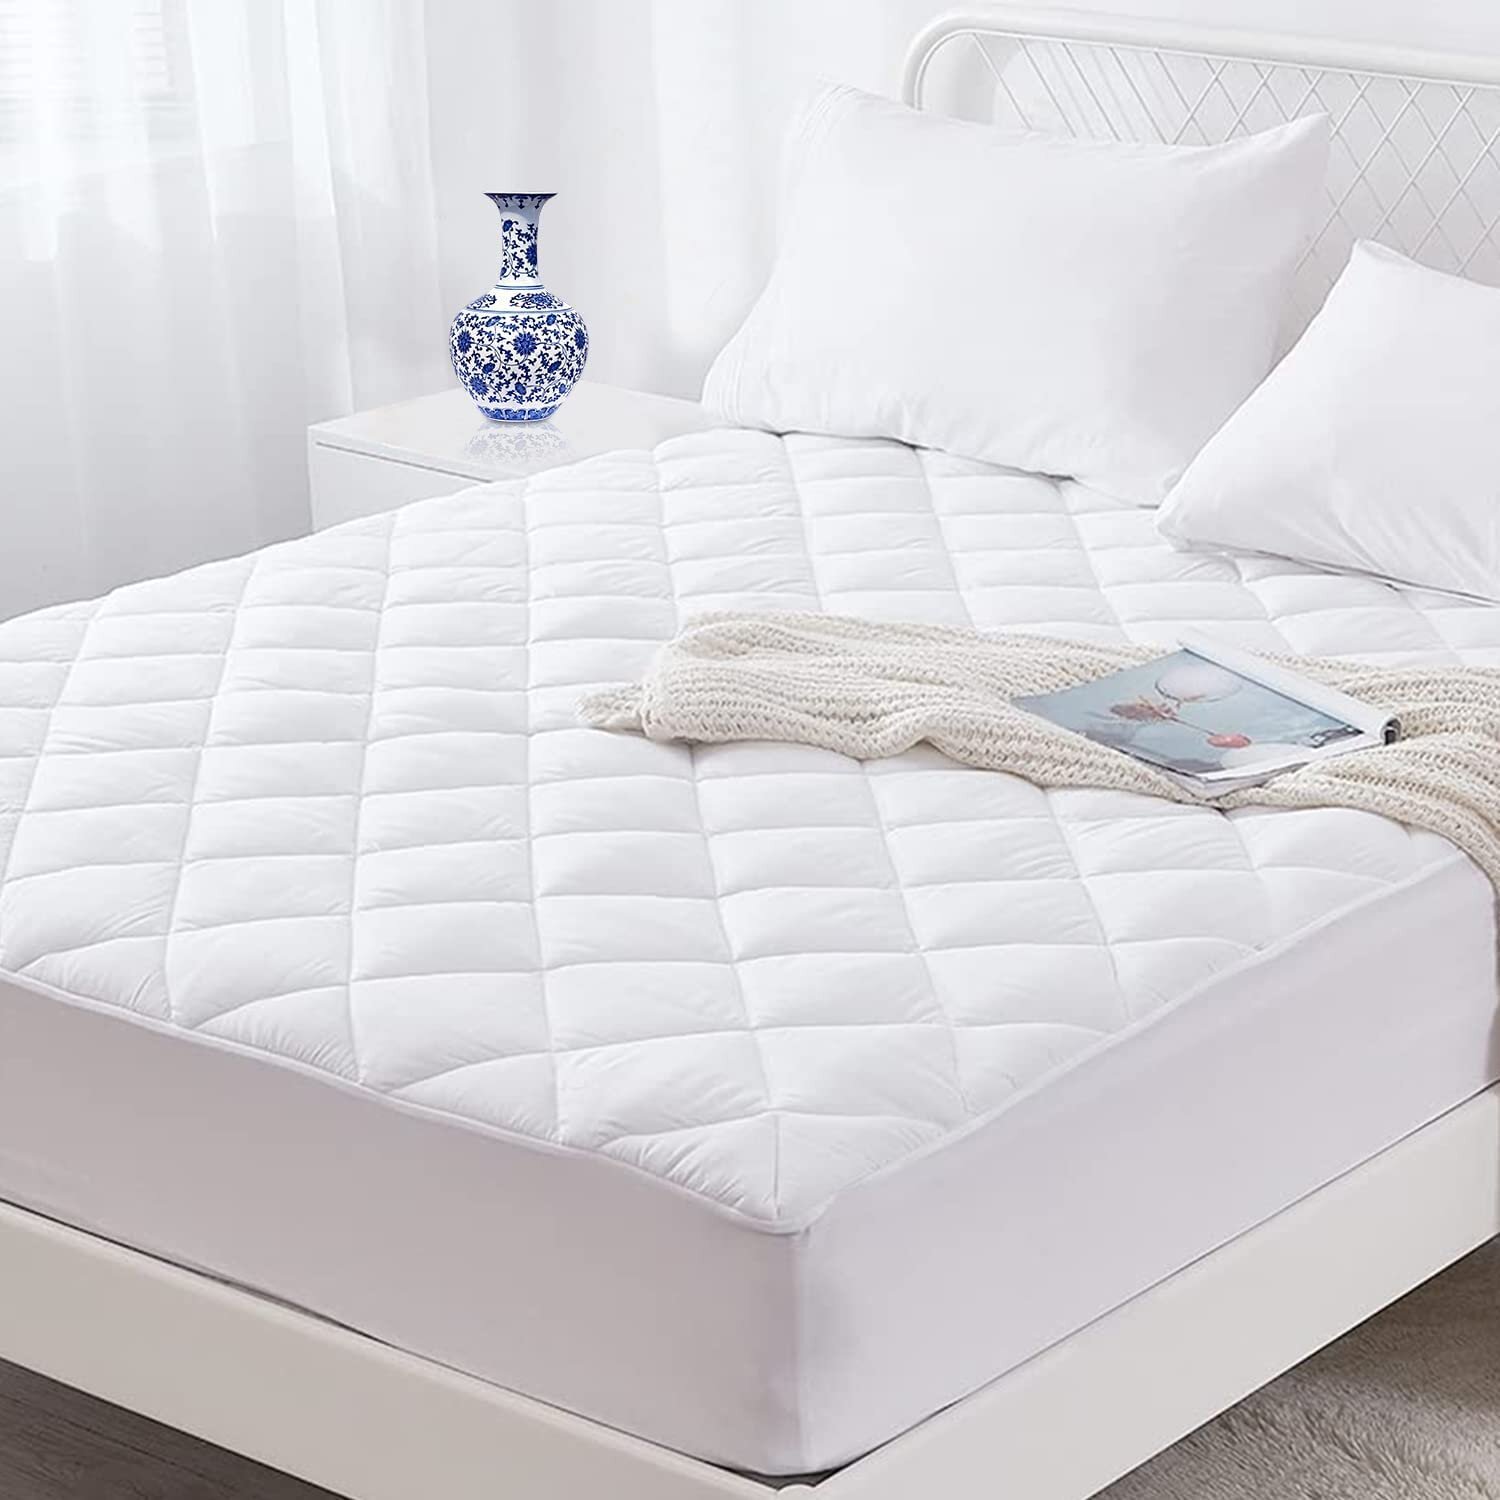 USA Made 4 Sizes Snuggle Home Quilted Fitted Memory Foam Bedroom Mattress Pad 